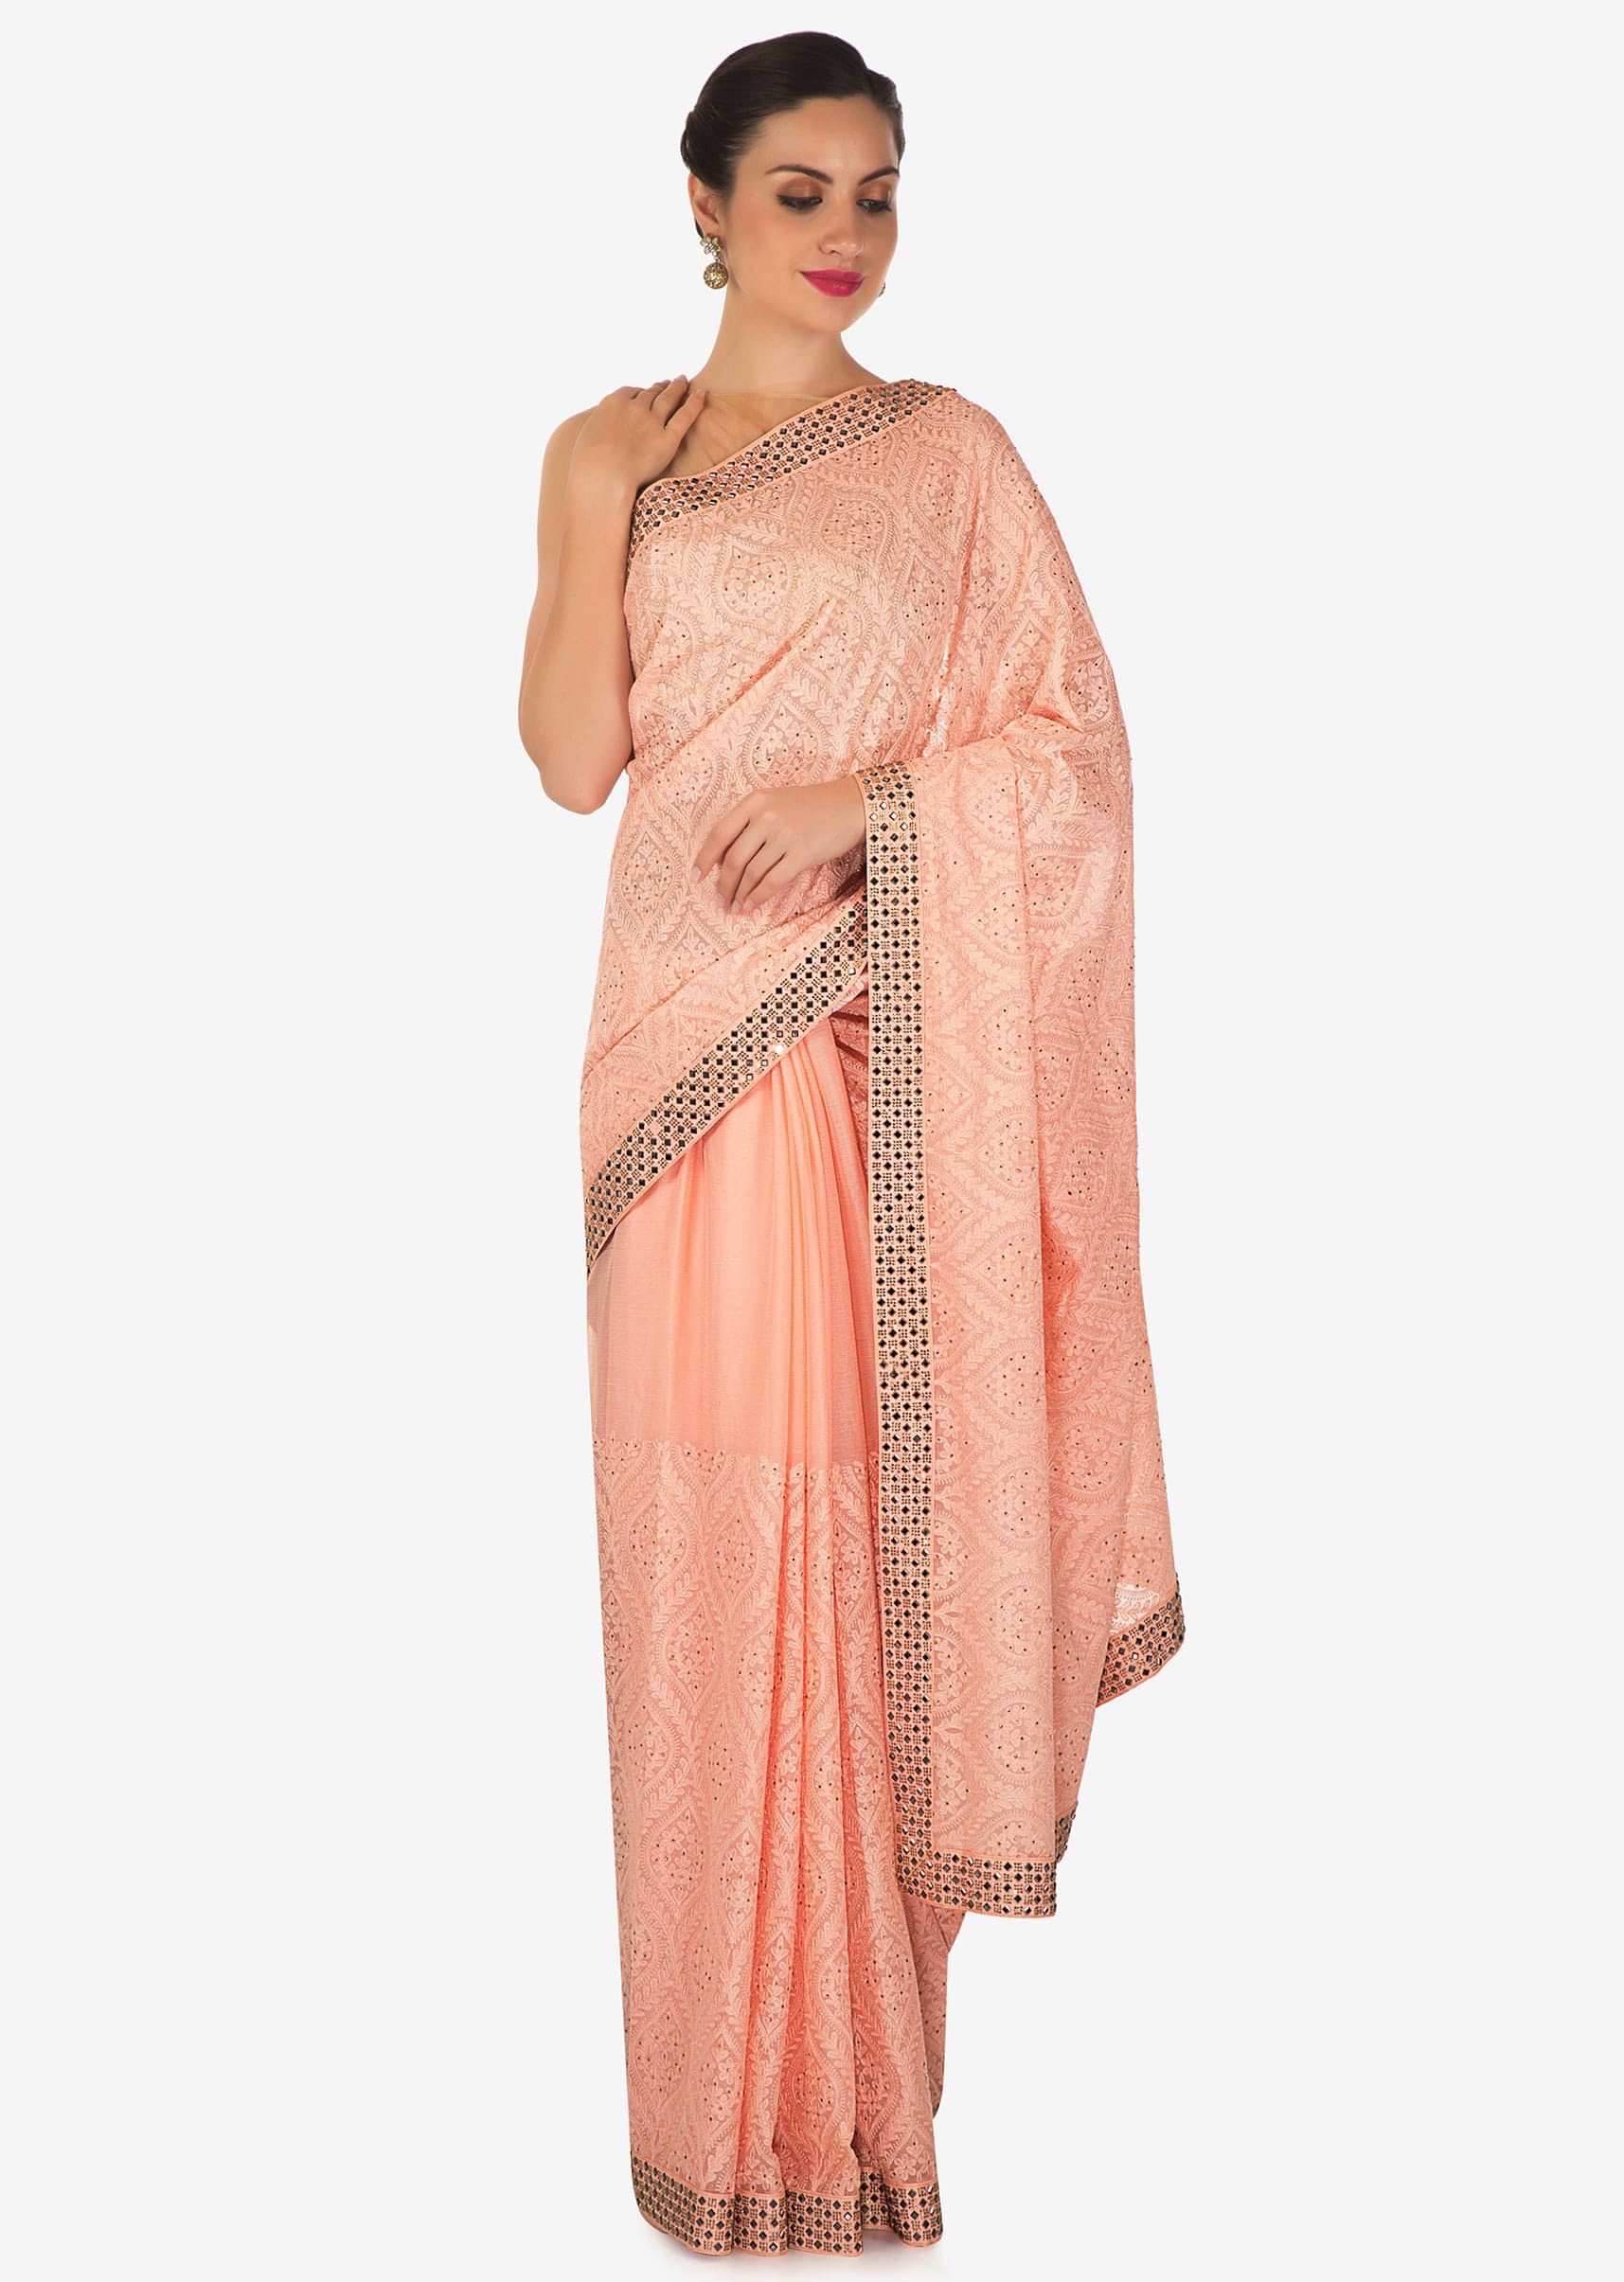 Light pink saree in georgette with thread and kundan work only on Kalki